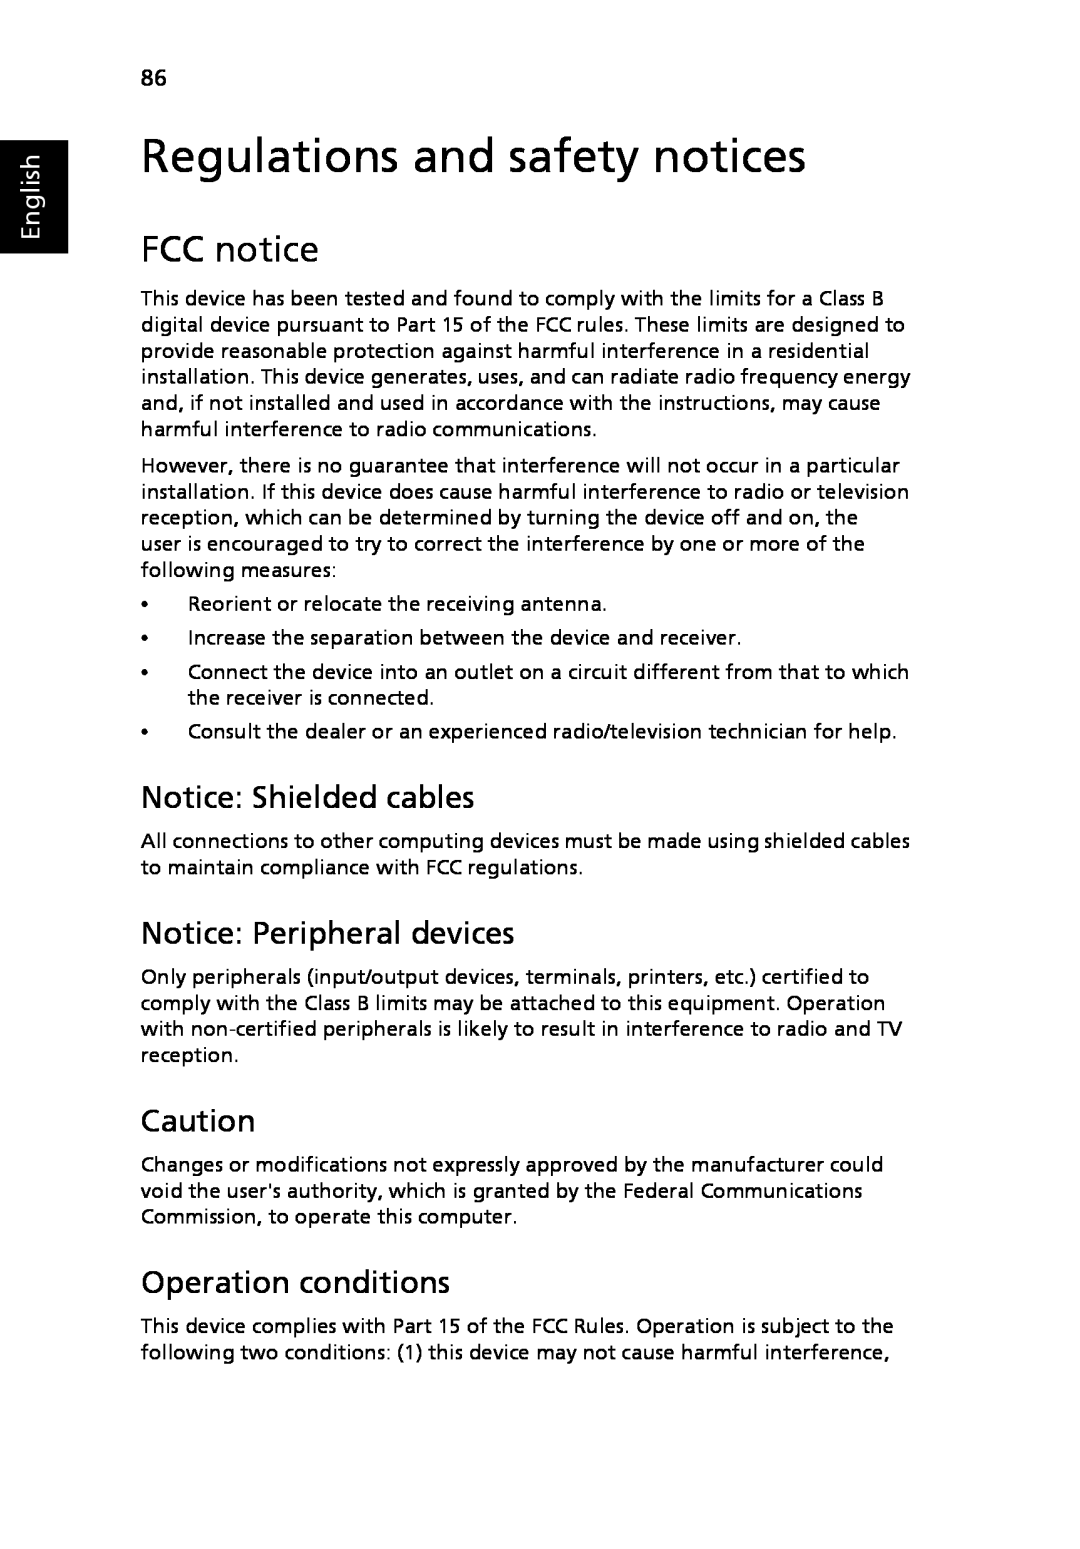 Acer 5220, 5520G Regulations and safety notices, FCC notice, Notice Shielded cables, Notice Peripheral devices, English 